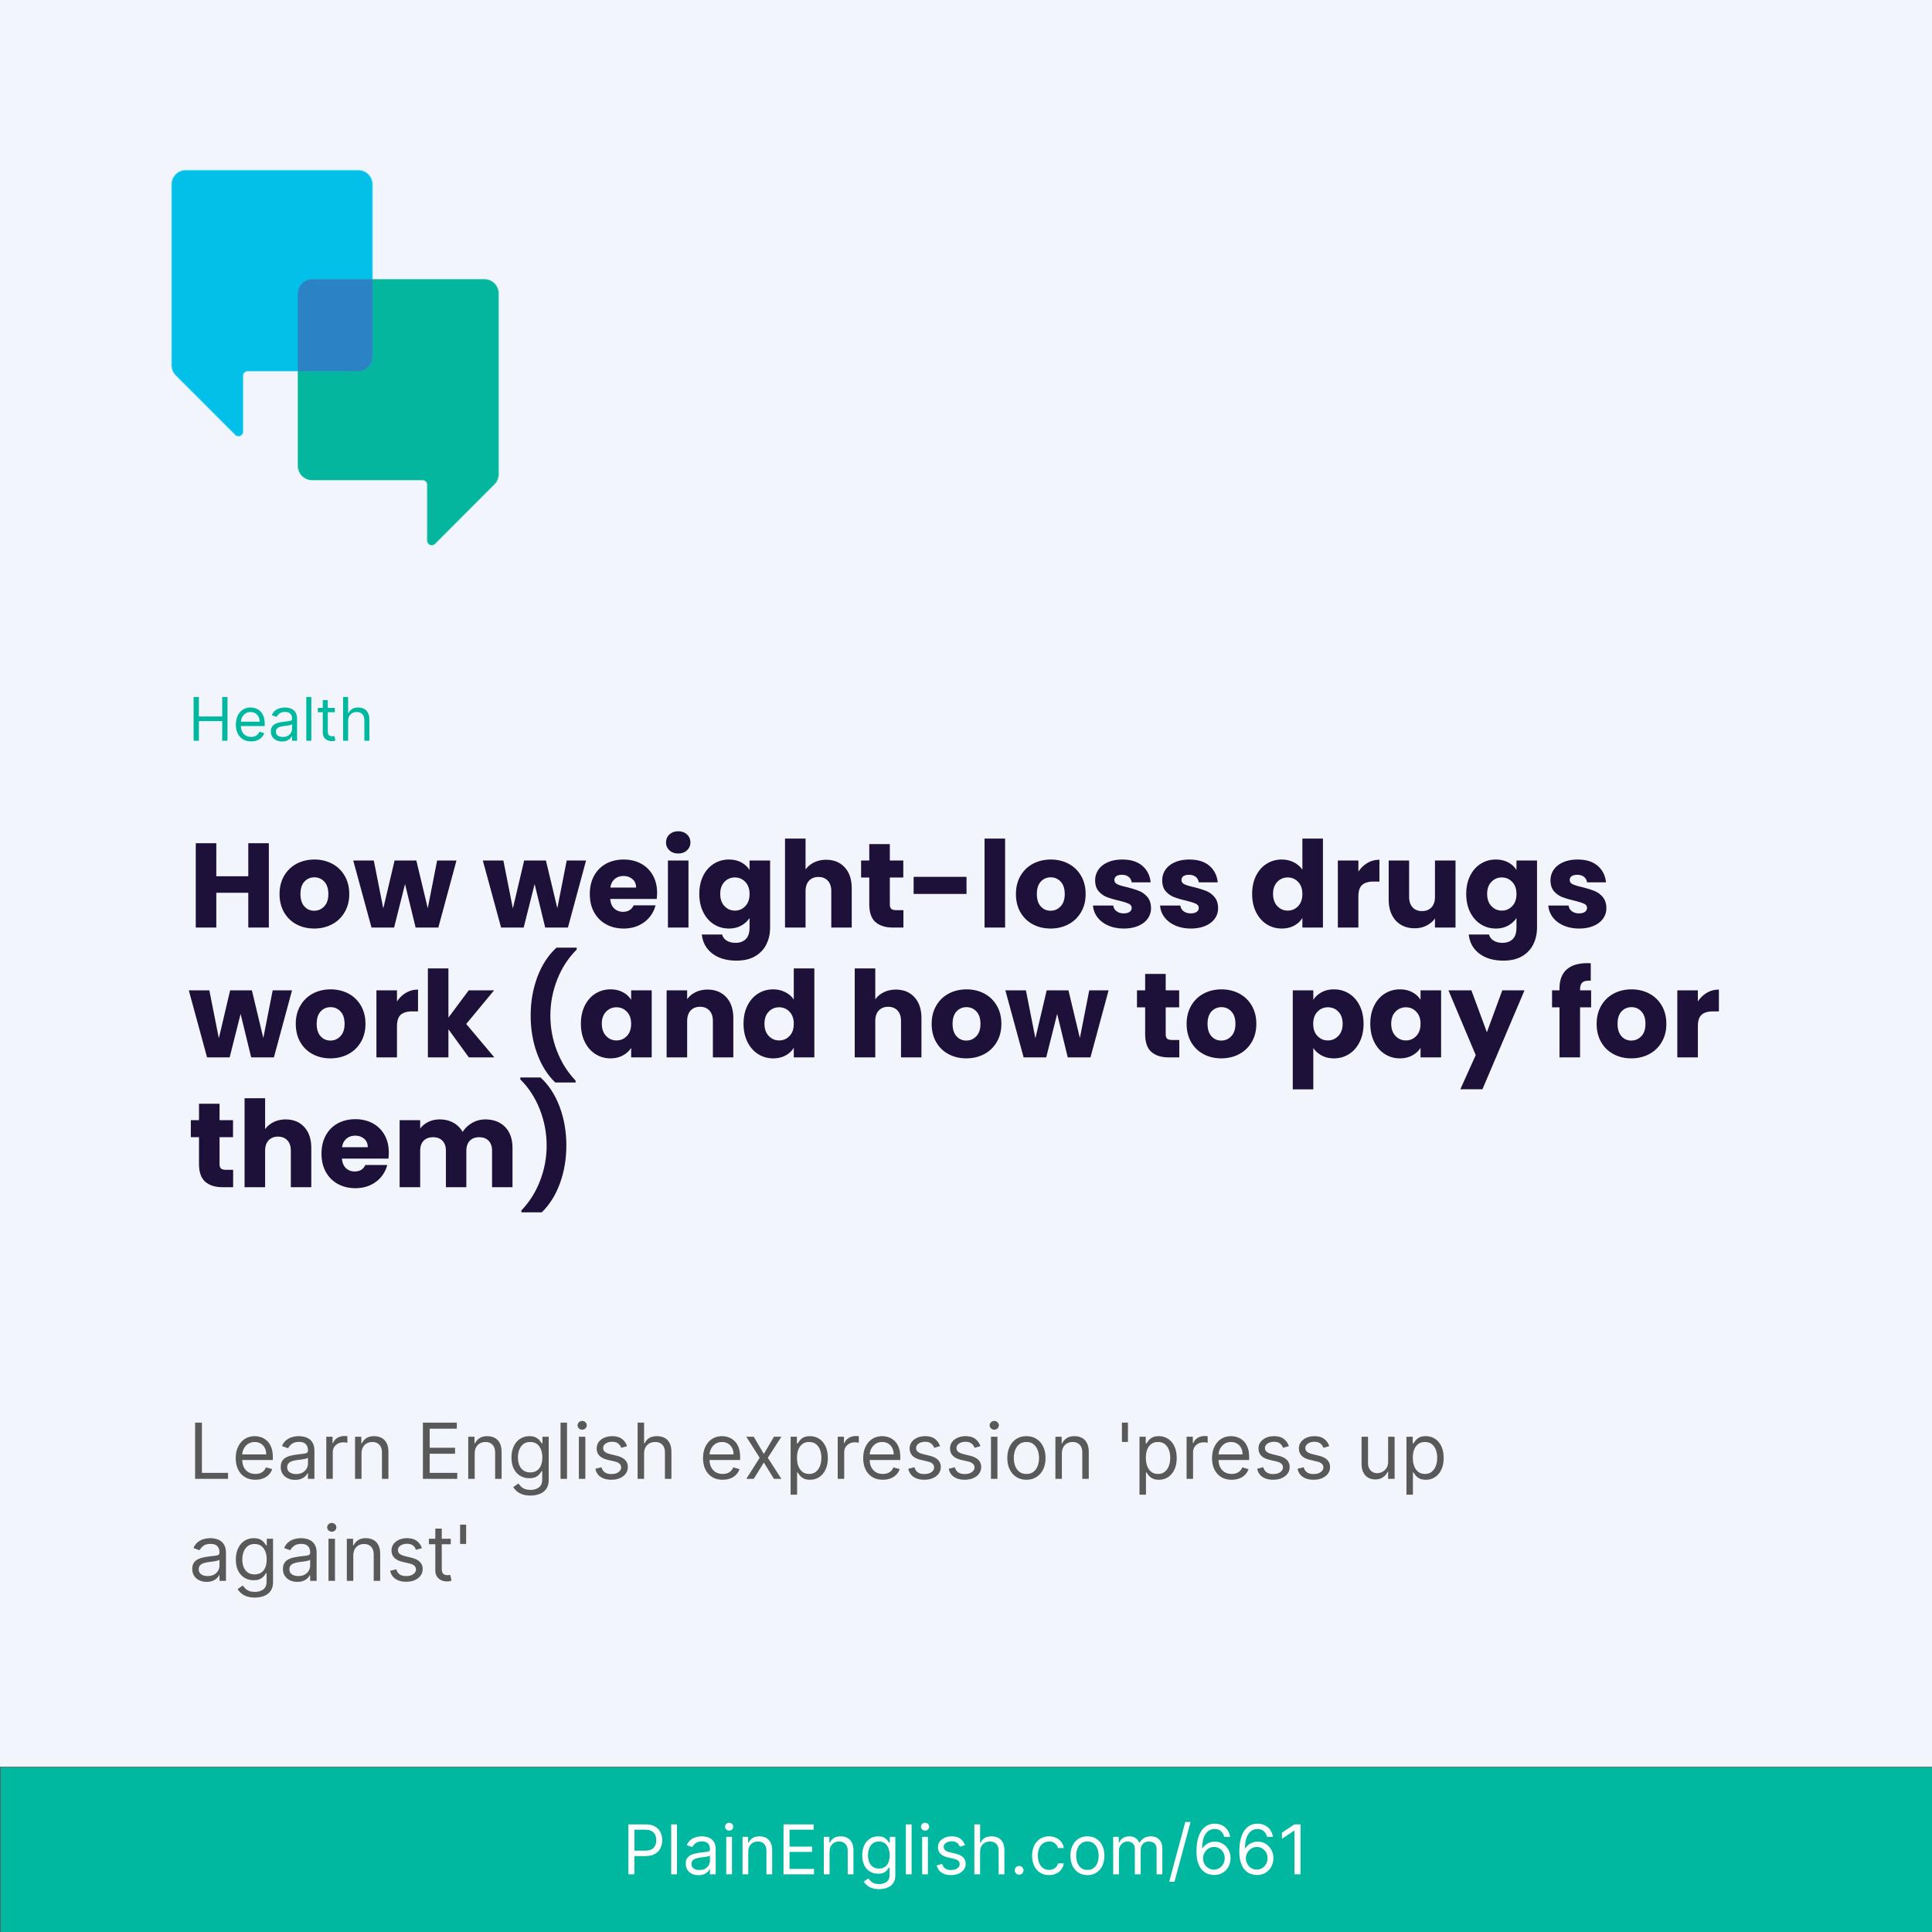 Four questions about weight-loss drugs (Press up against)